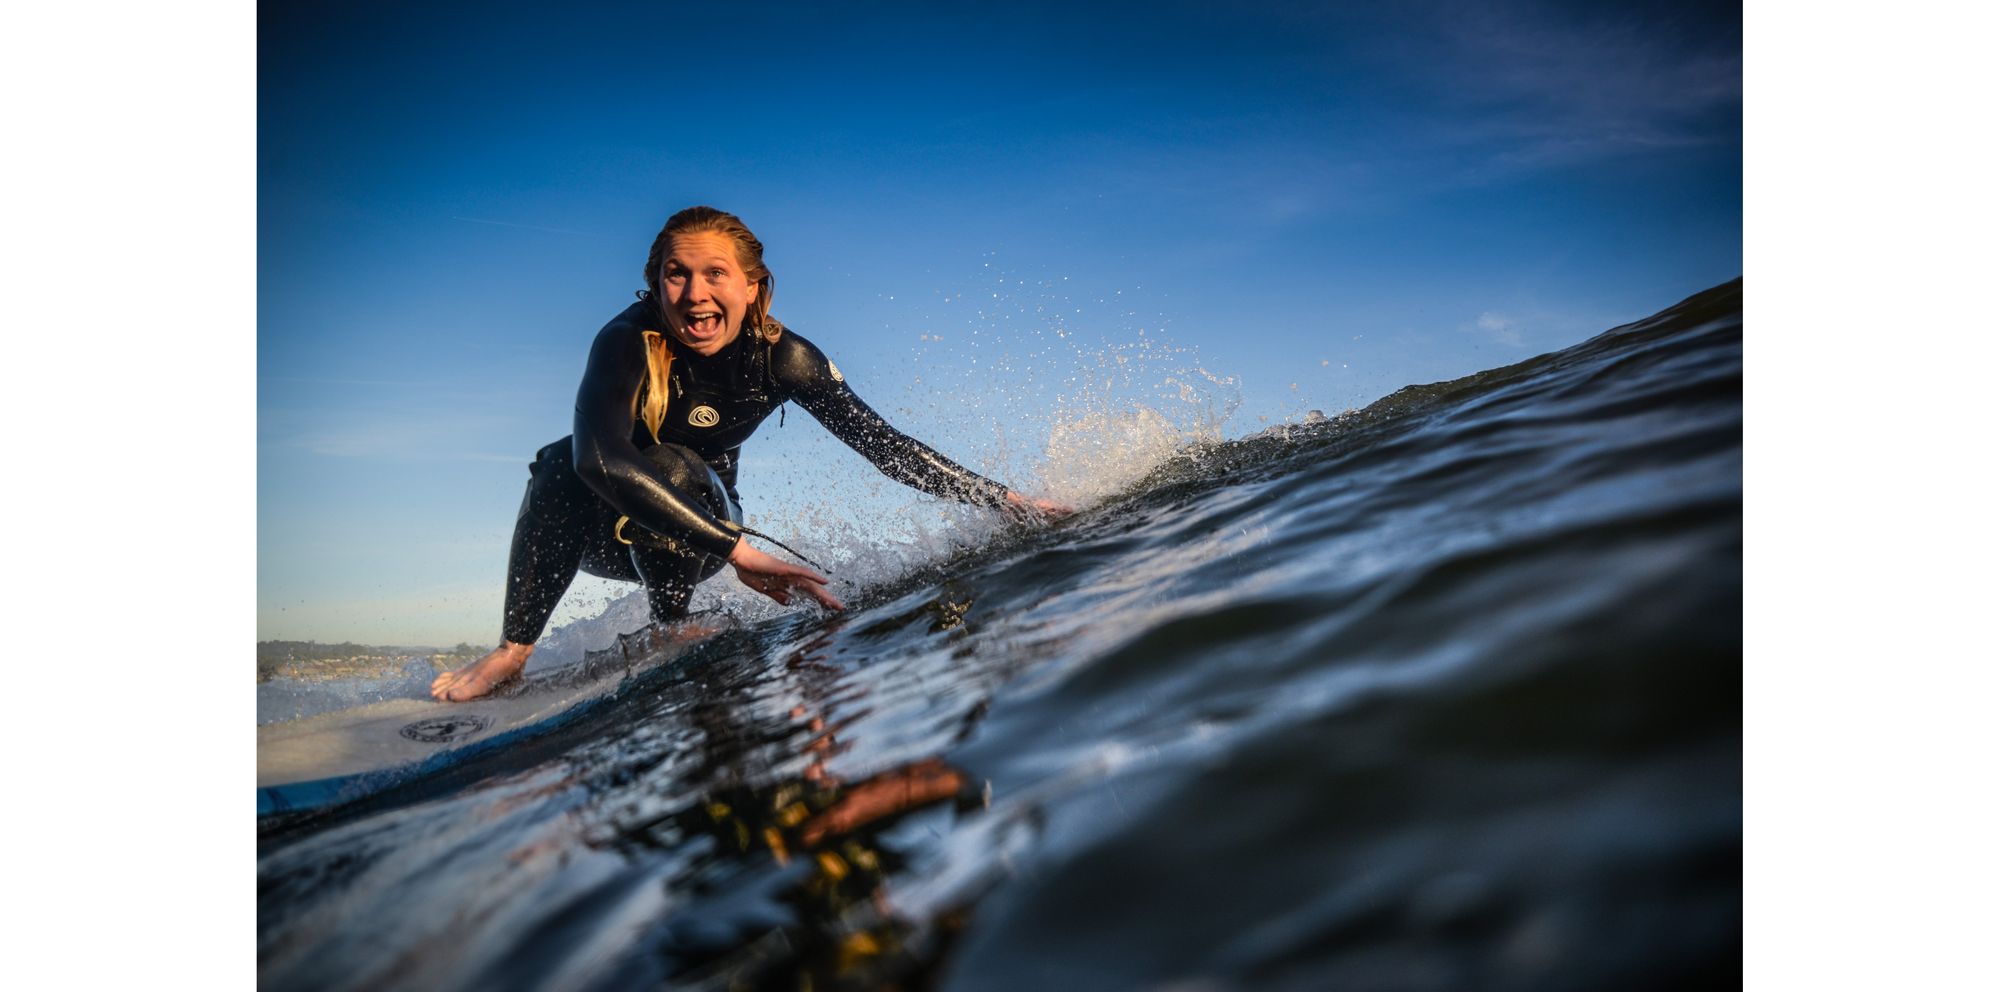 Capitola's Best Choice for Sup & Surf Lessons - Katy Collins